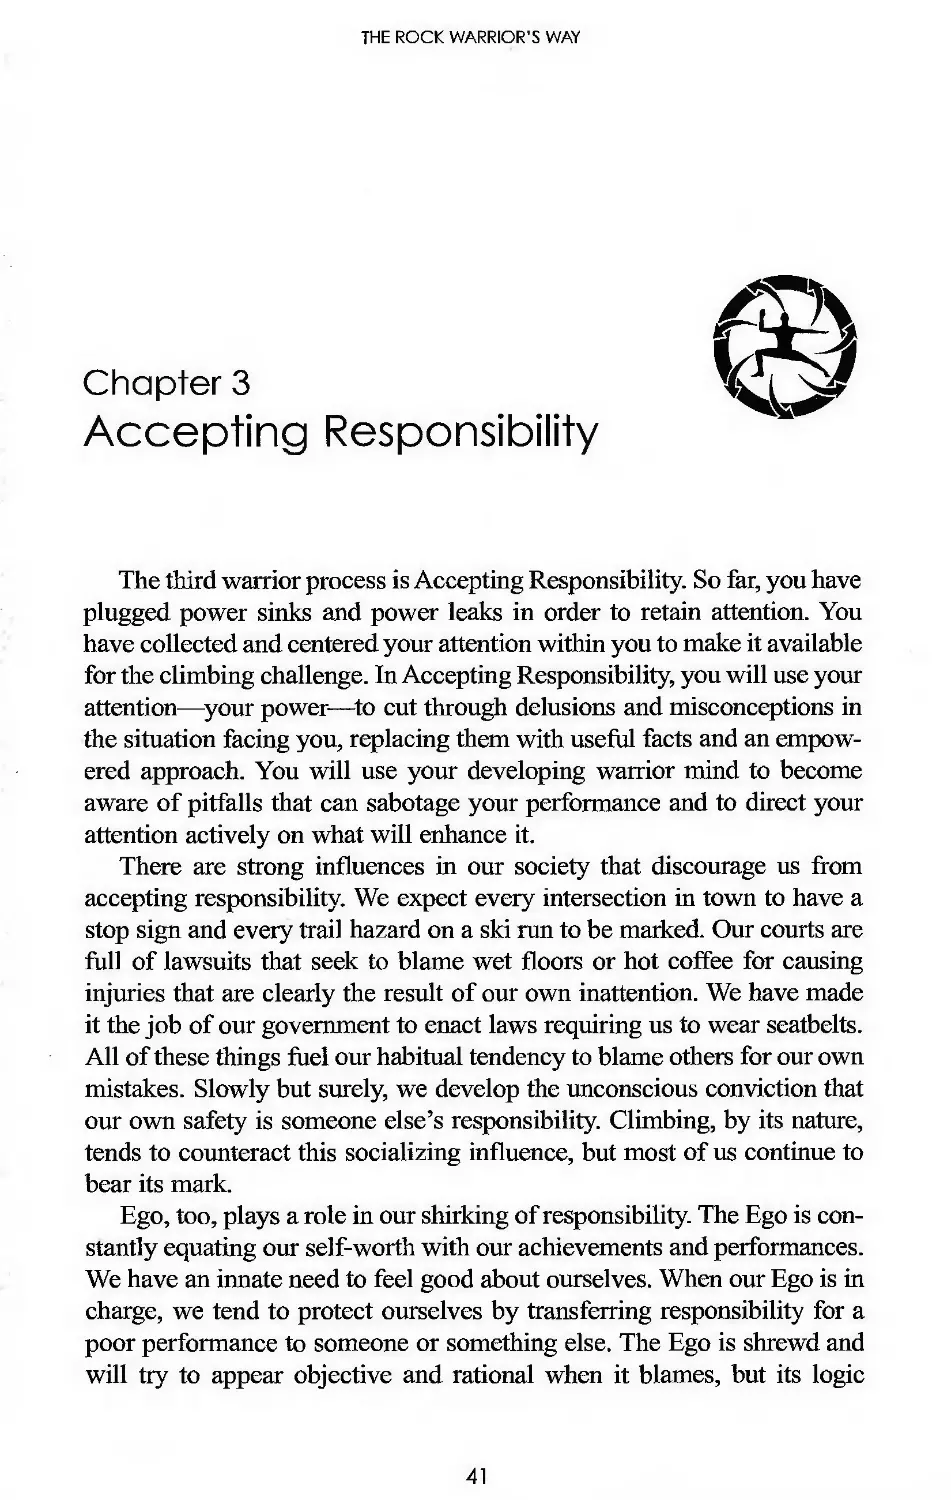 3. Accepting Responsibility